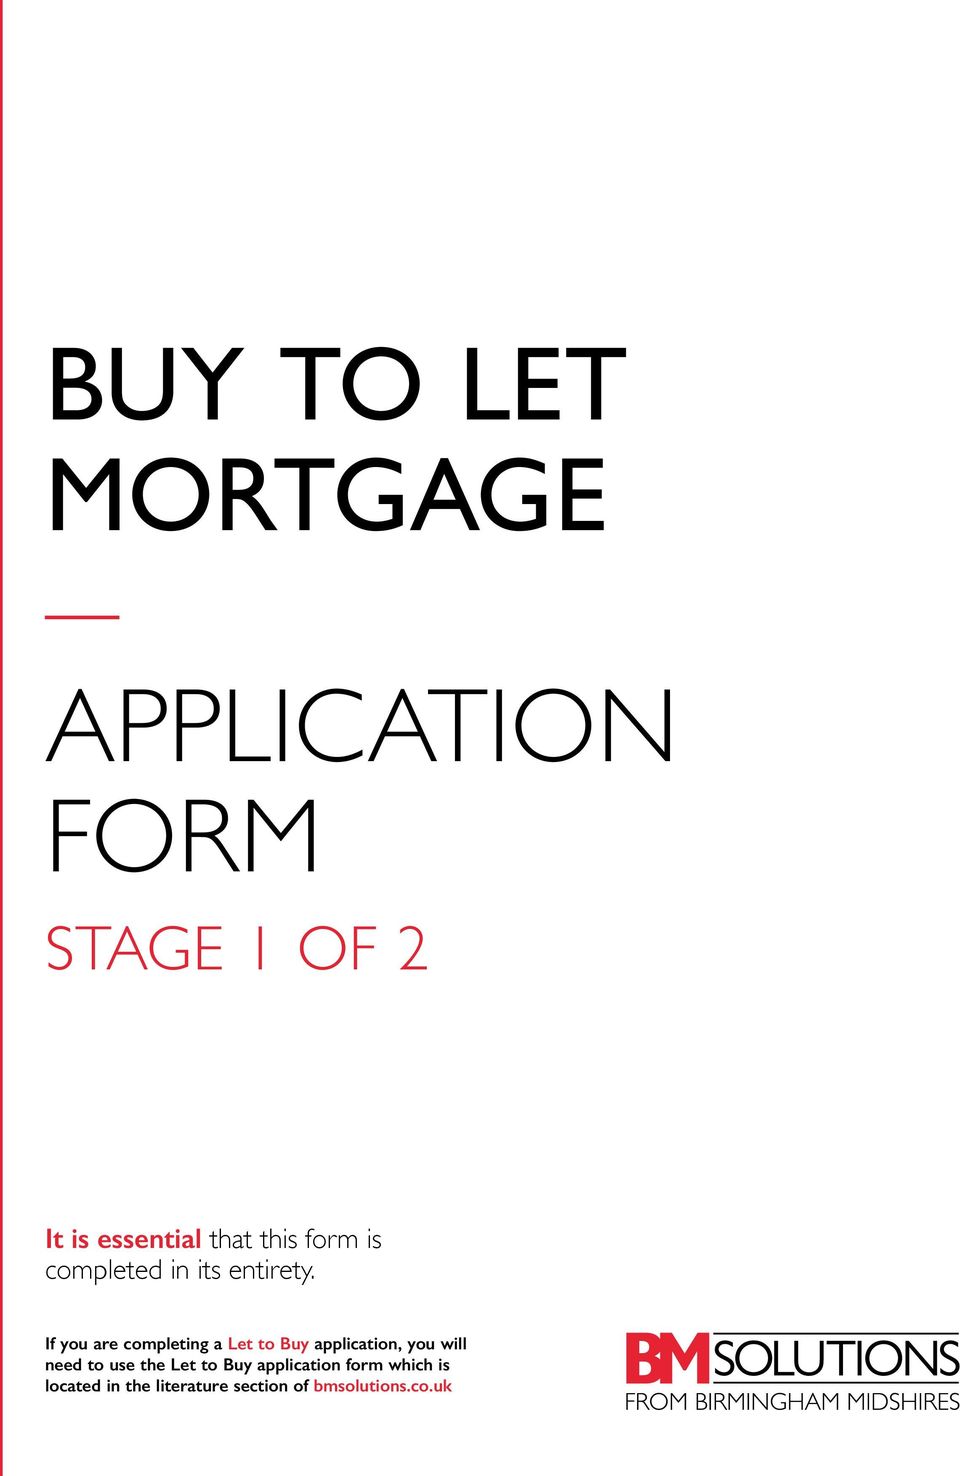 If you are completing a Let to Buy application, you will need to use